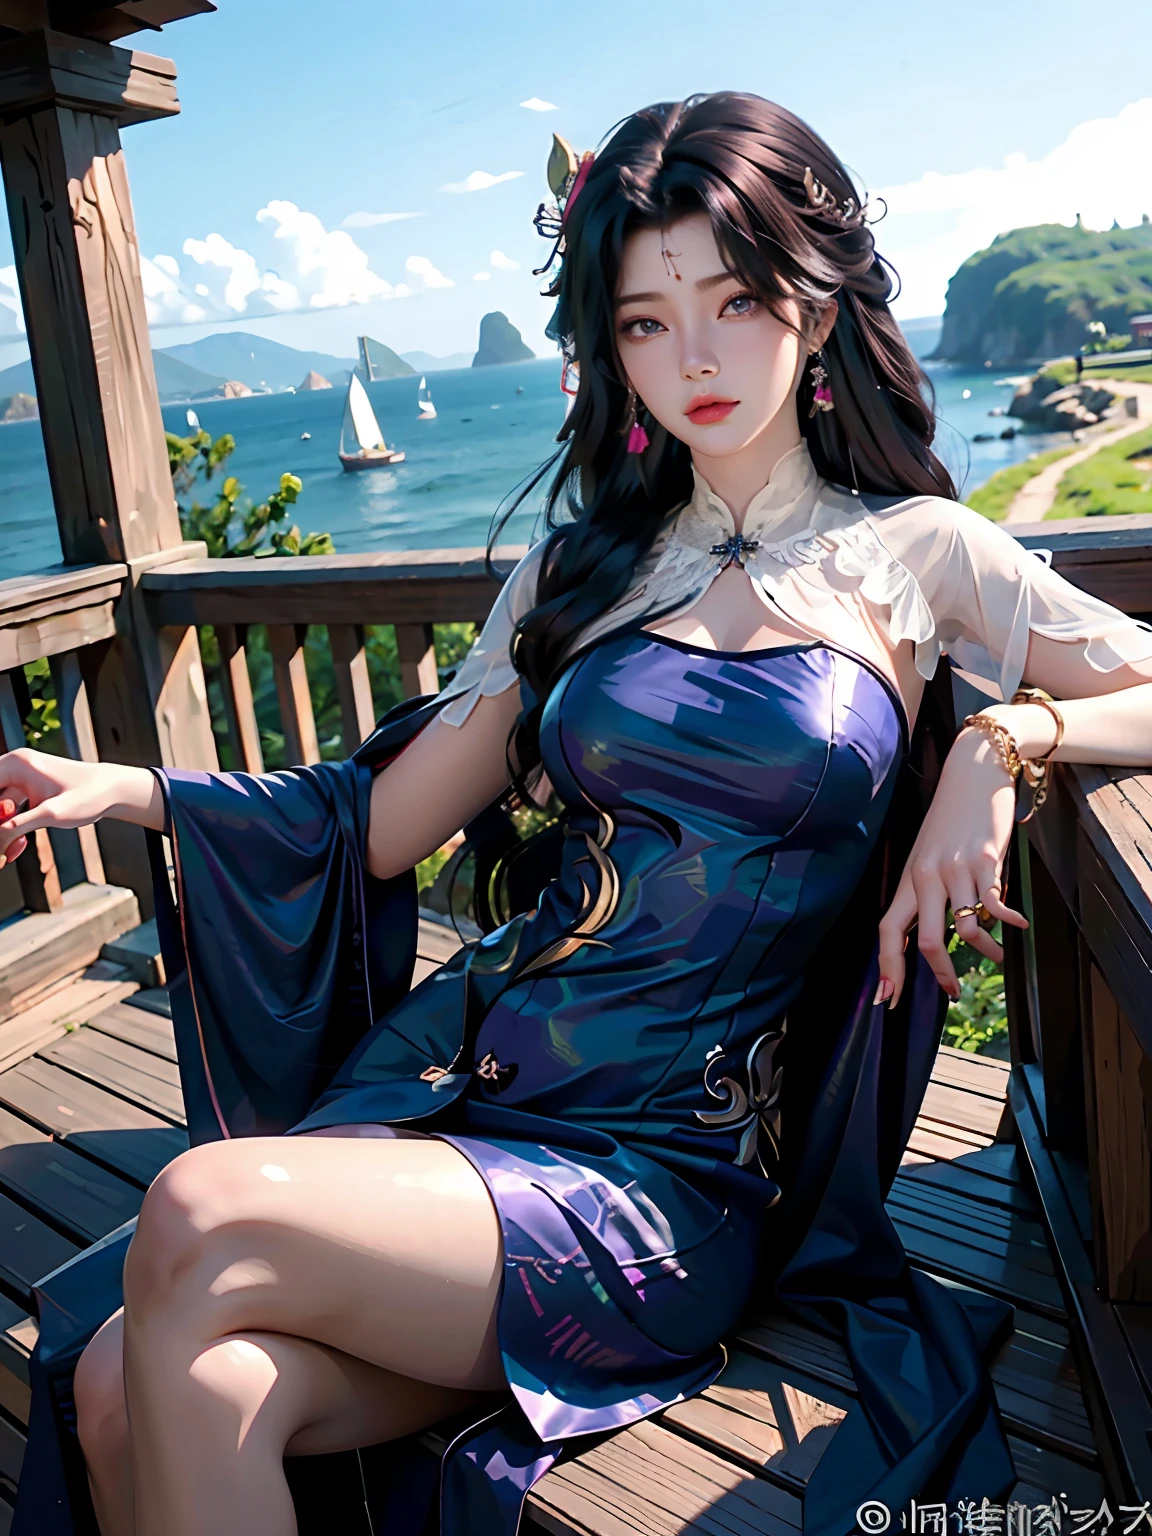 （（top-quality，16k，tmasterpiece：1.3）），（（（Yun Xi）），Beautiful Women in Perfect Shape：1.3，（（lewd poses）），（（high-heels））），（Have by the sea），（（Antique long dress））